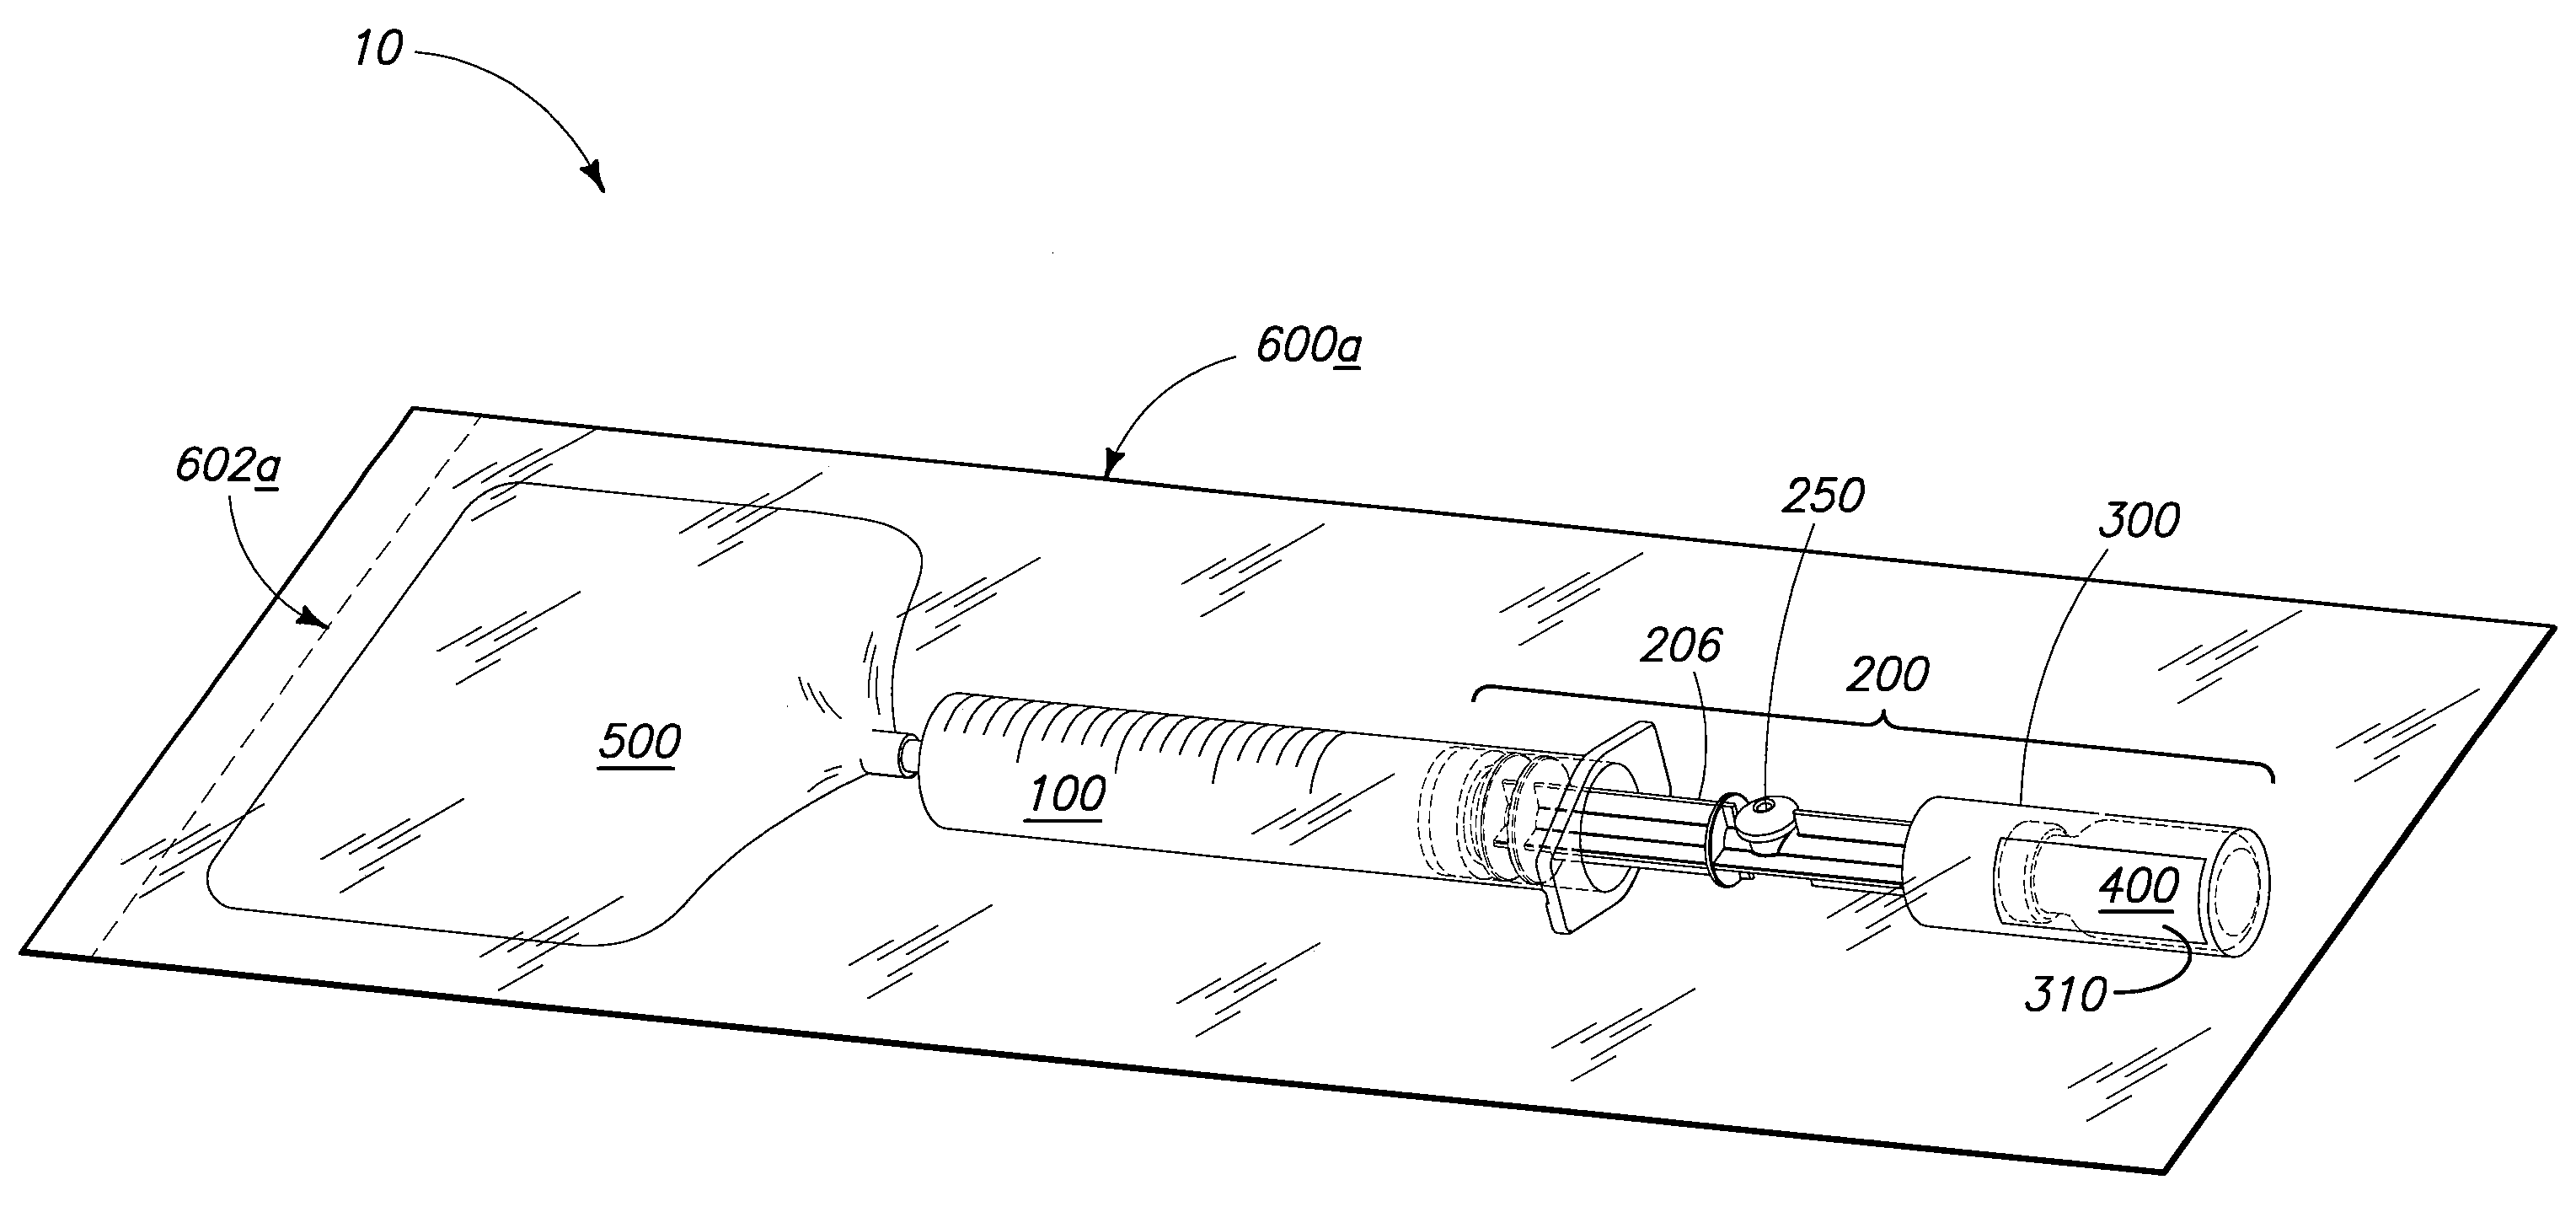 Mixing/Administration Syringe Devices, Protective Packaging and Methods of Protecting Syringe Handlers